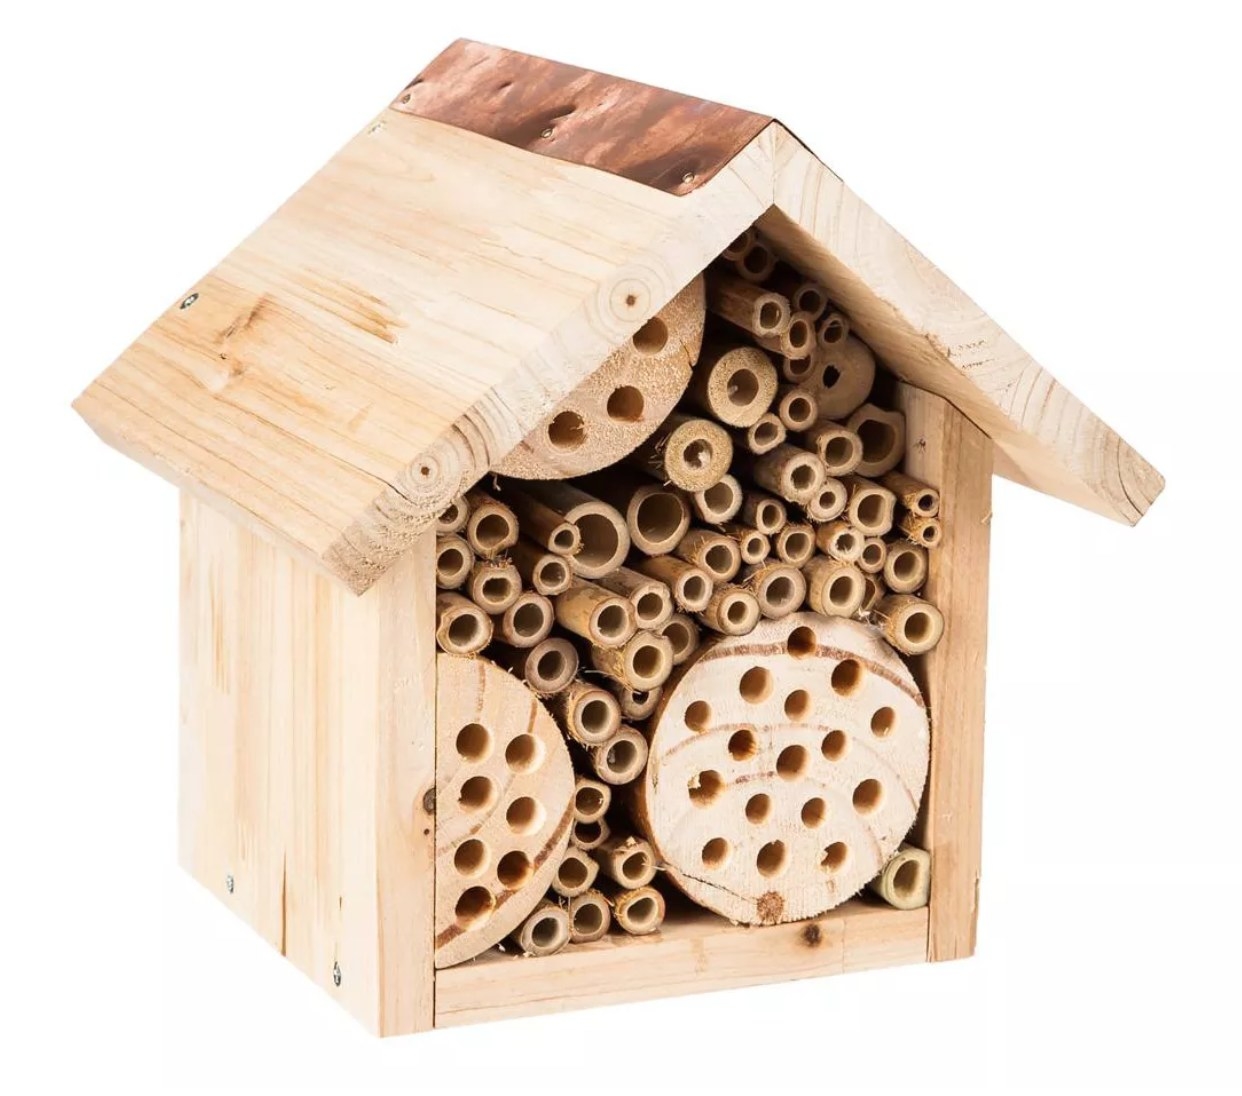 A bee hive that&#x27;s made of wood and shaped like a house